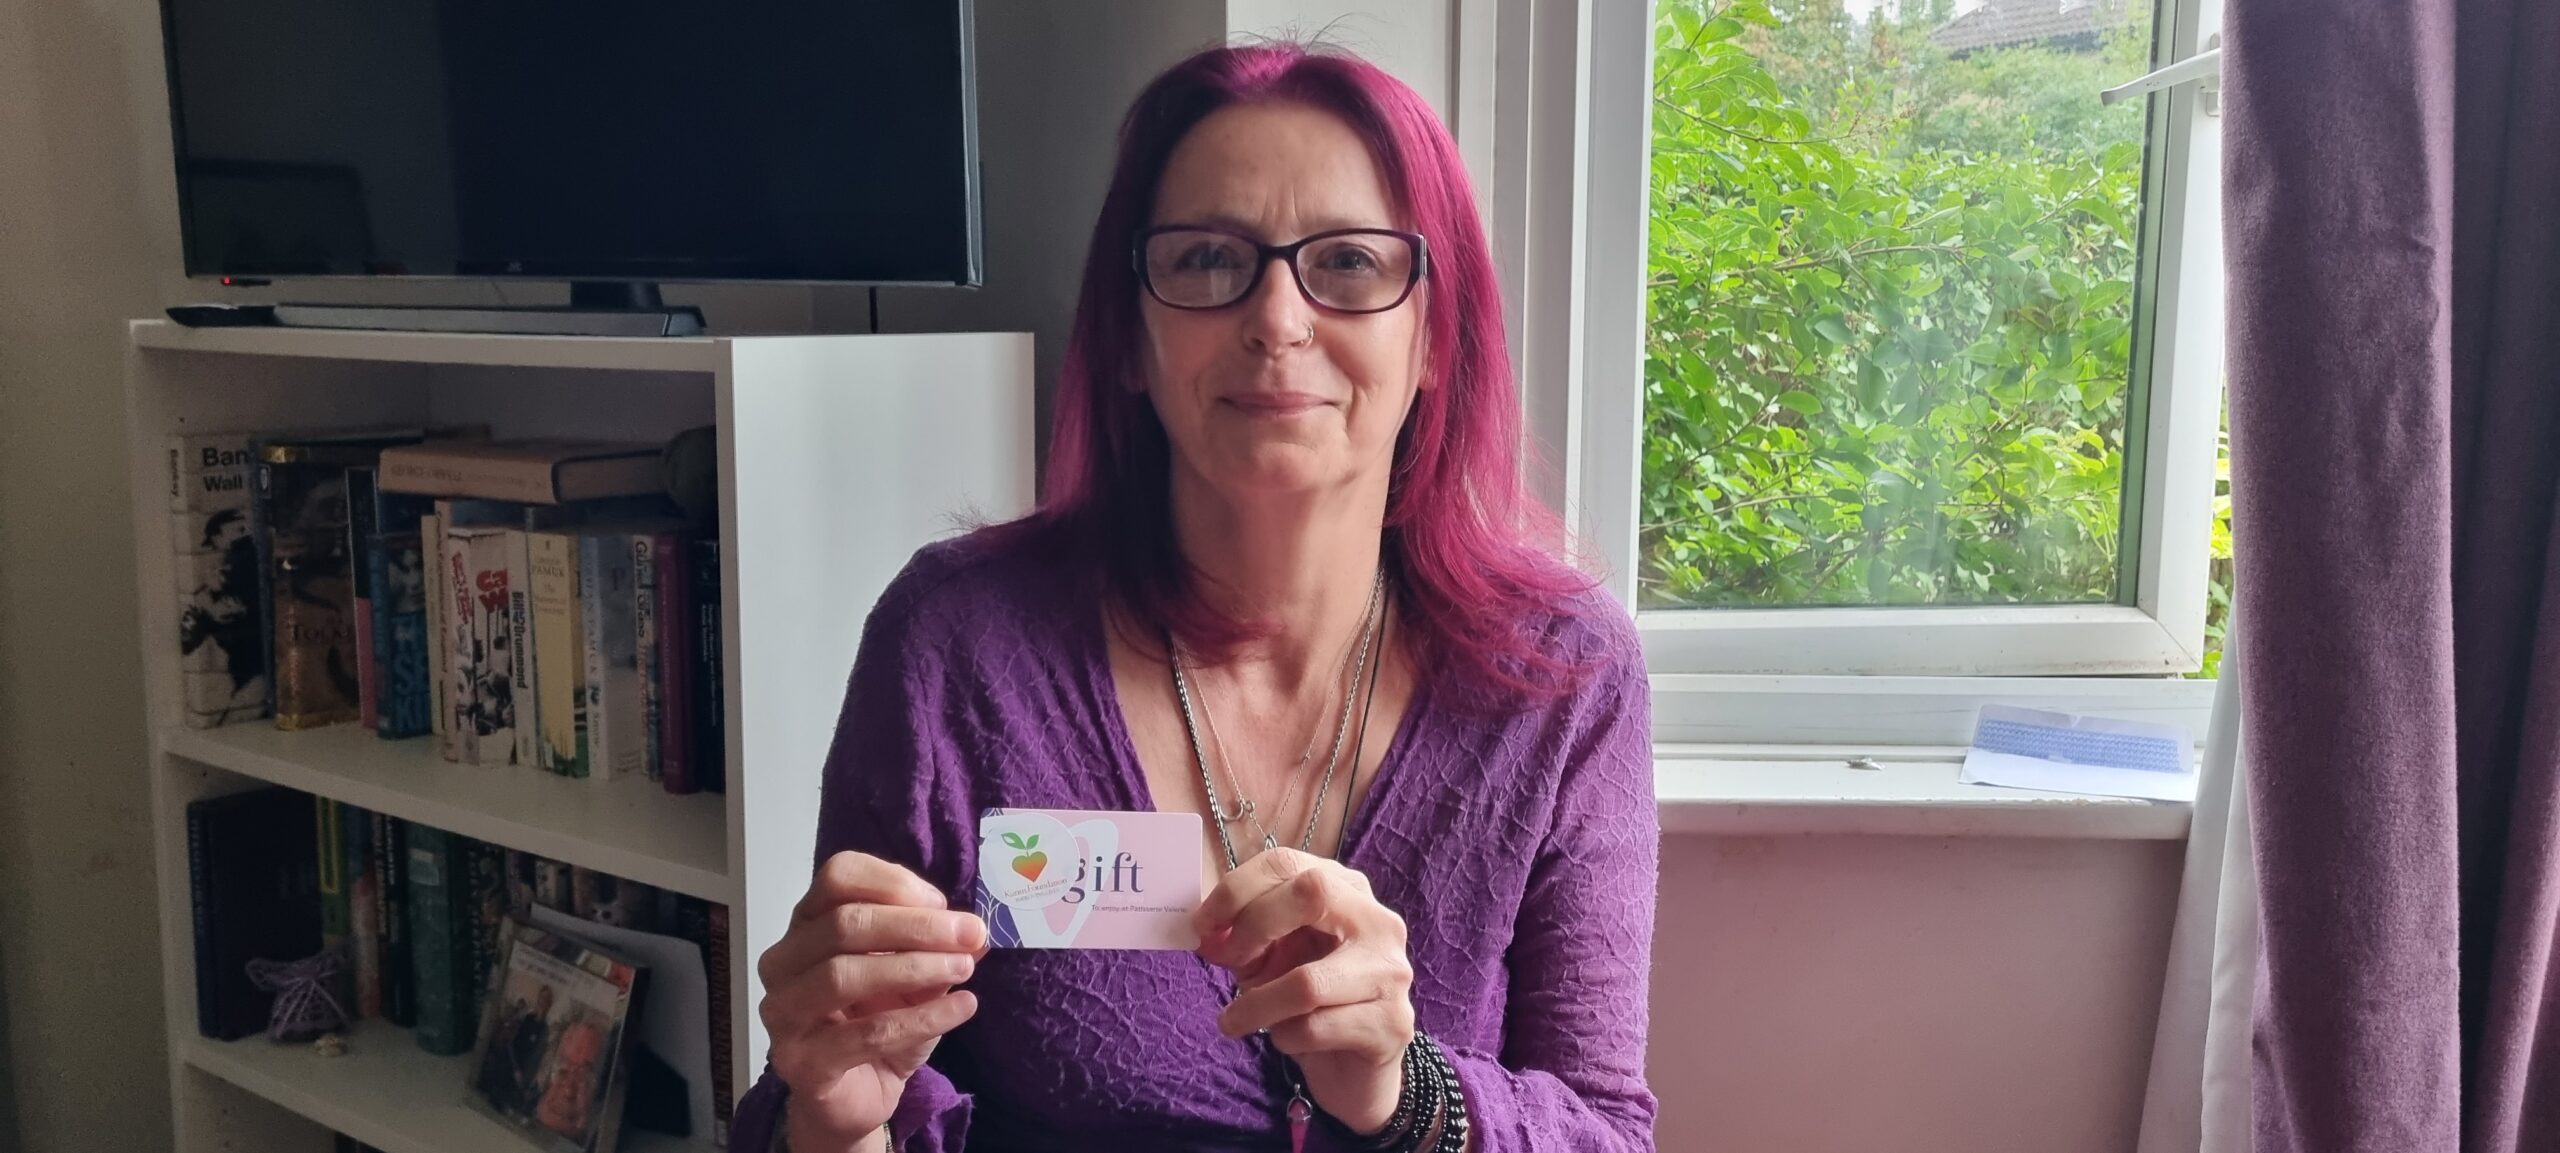 Asa Benstead is the winner of the Karim Foundation's Free Prize Draw, held at the 2023 Arbury Carnival. She is holding a Patisserie Valerie gift card.